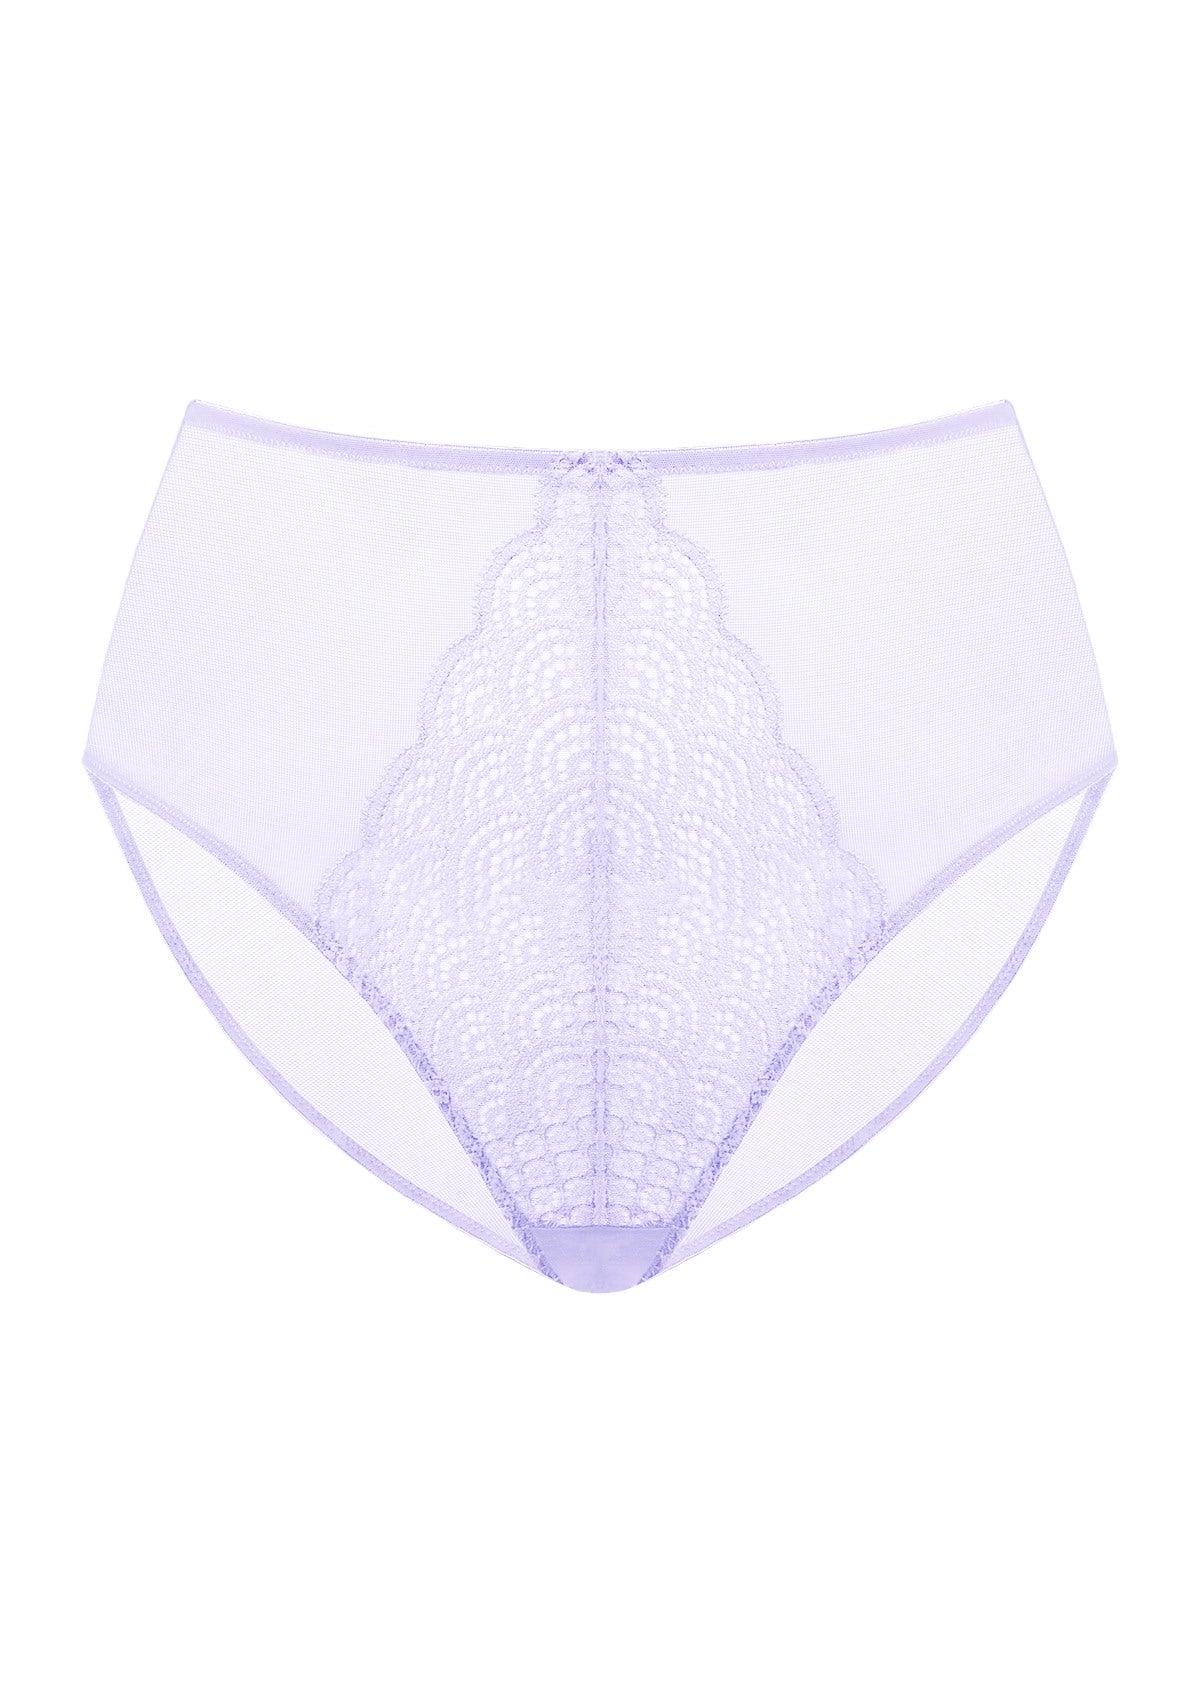 HSIA Spring Romance High-Rise Floral Lacy Panty-Comfort In Style - XXXL / Light Purple